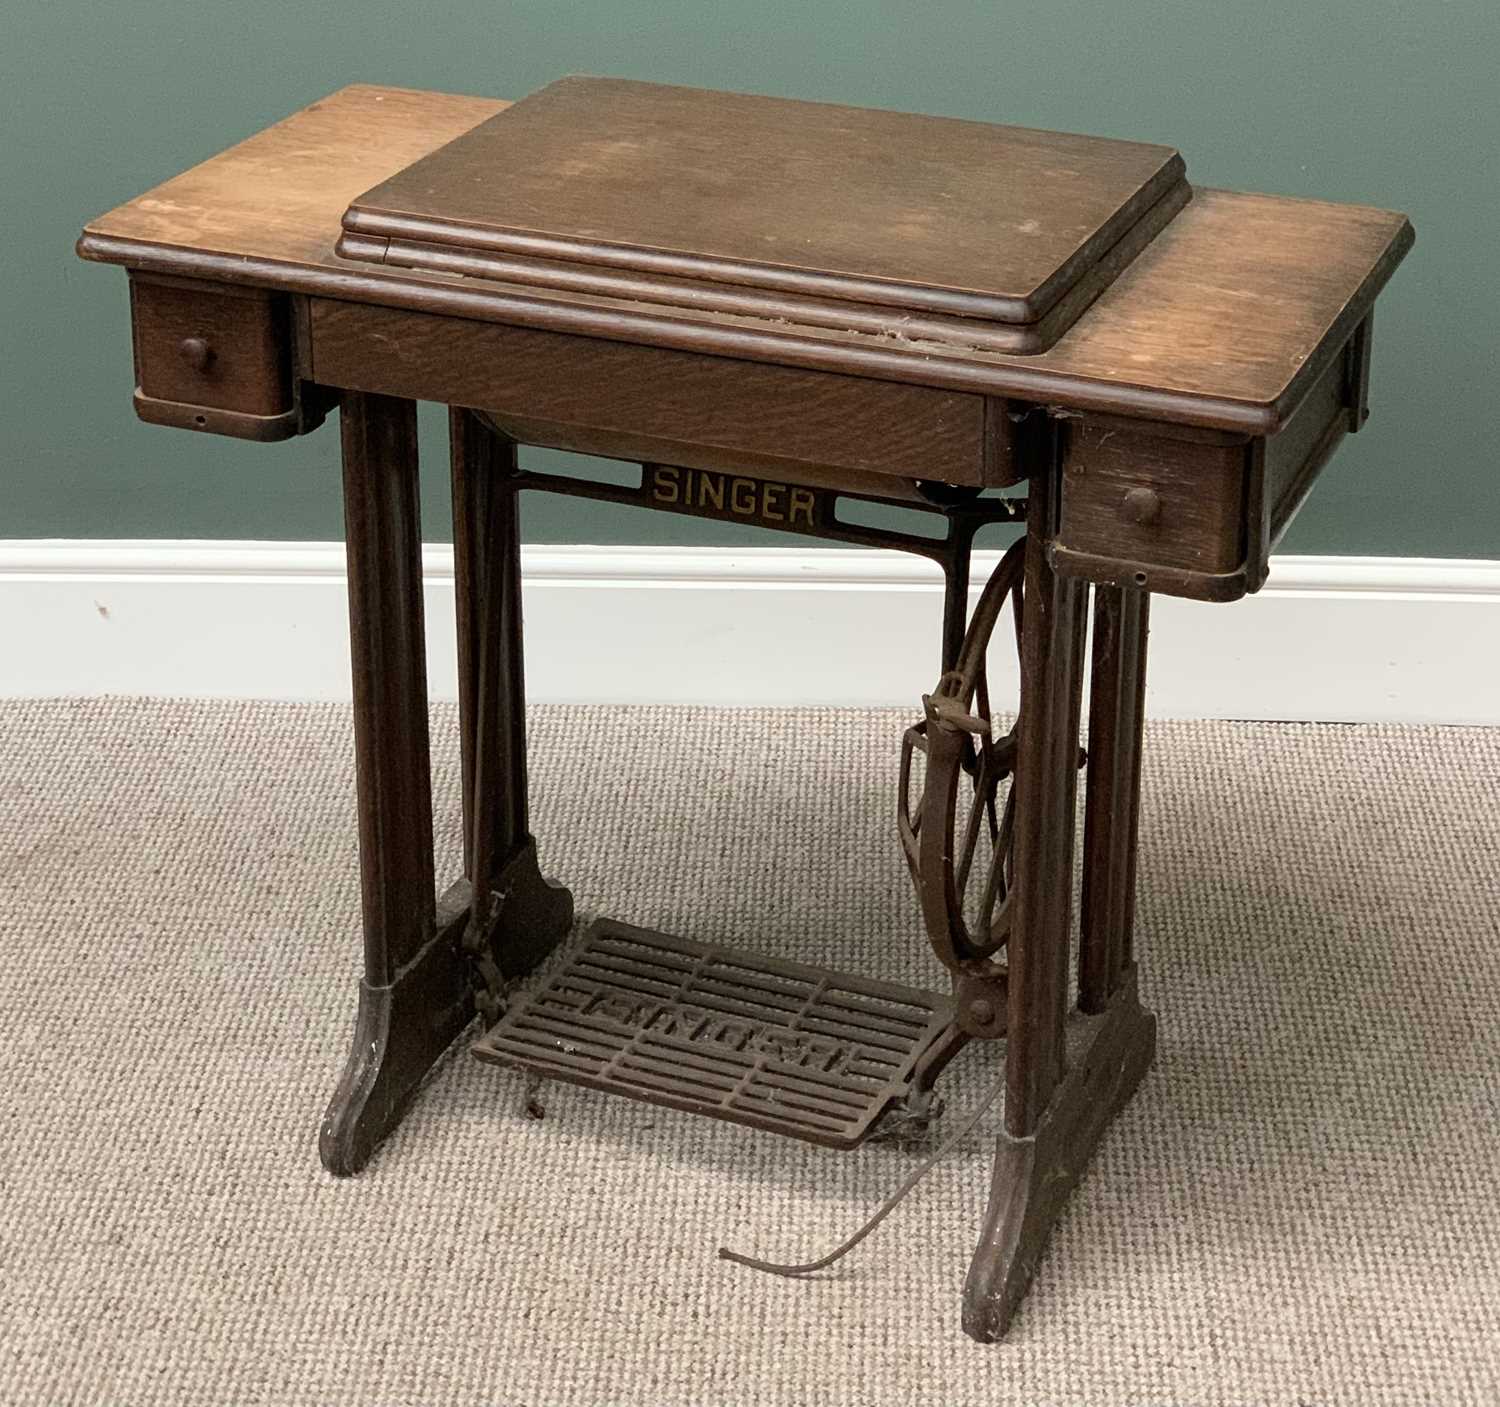 SINGER TREADLE SEWING MACHINE, 100cms H, 117cms W, 42cms D - Image 2 of 3